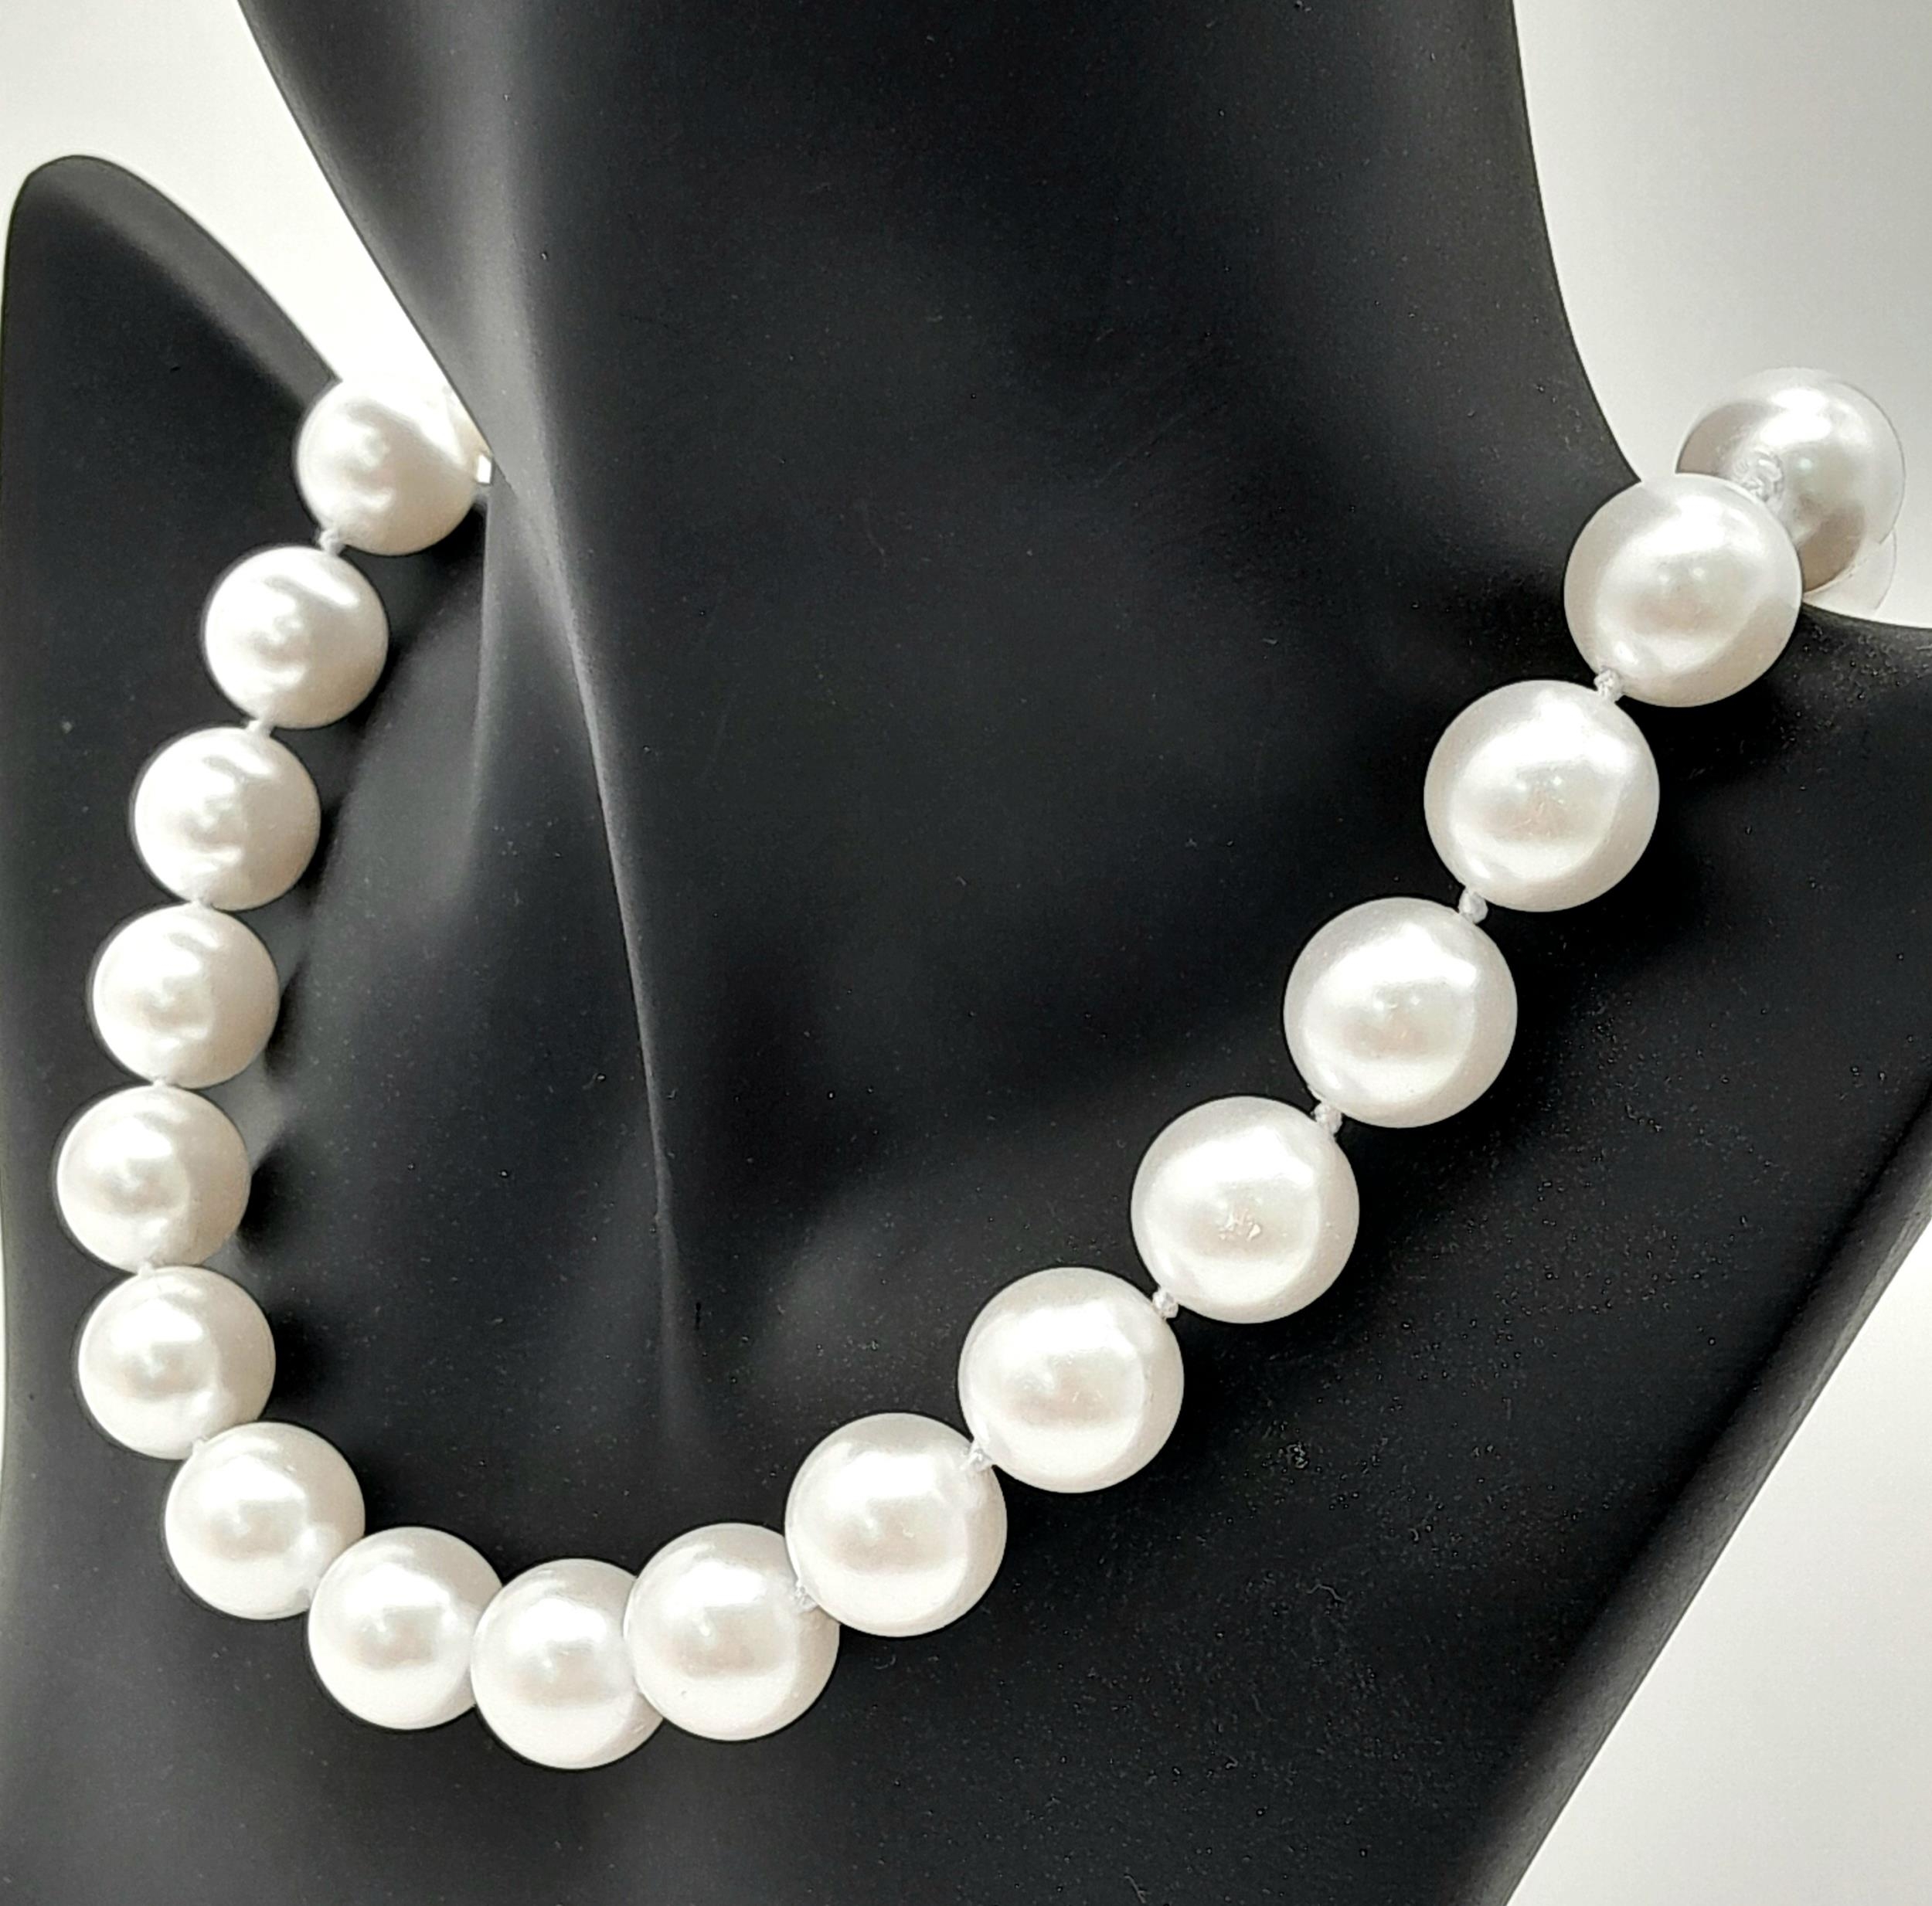 A Bright White South Sea Pearl Shell Bead Necklace. 14mm beads. 40cm. Gilded clasp. - Image 2 of 4